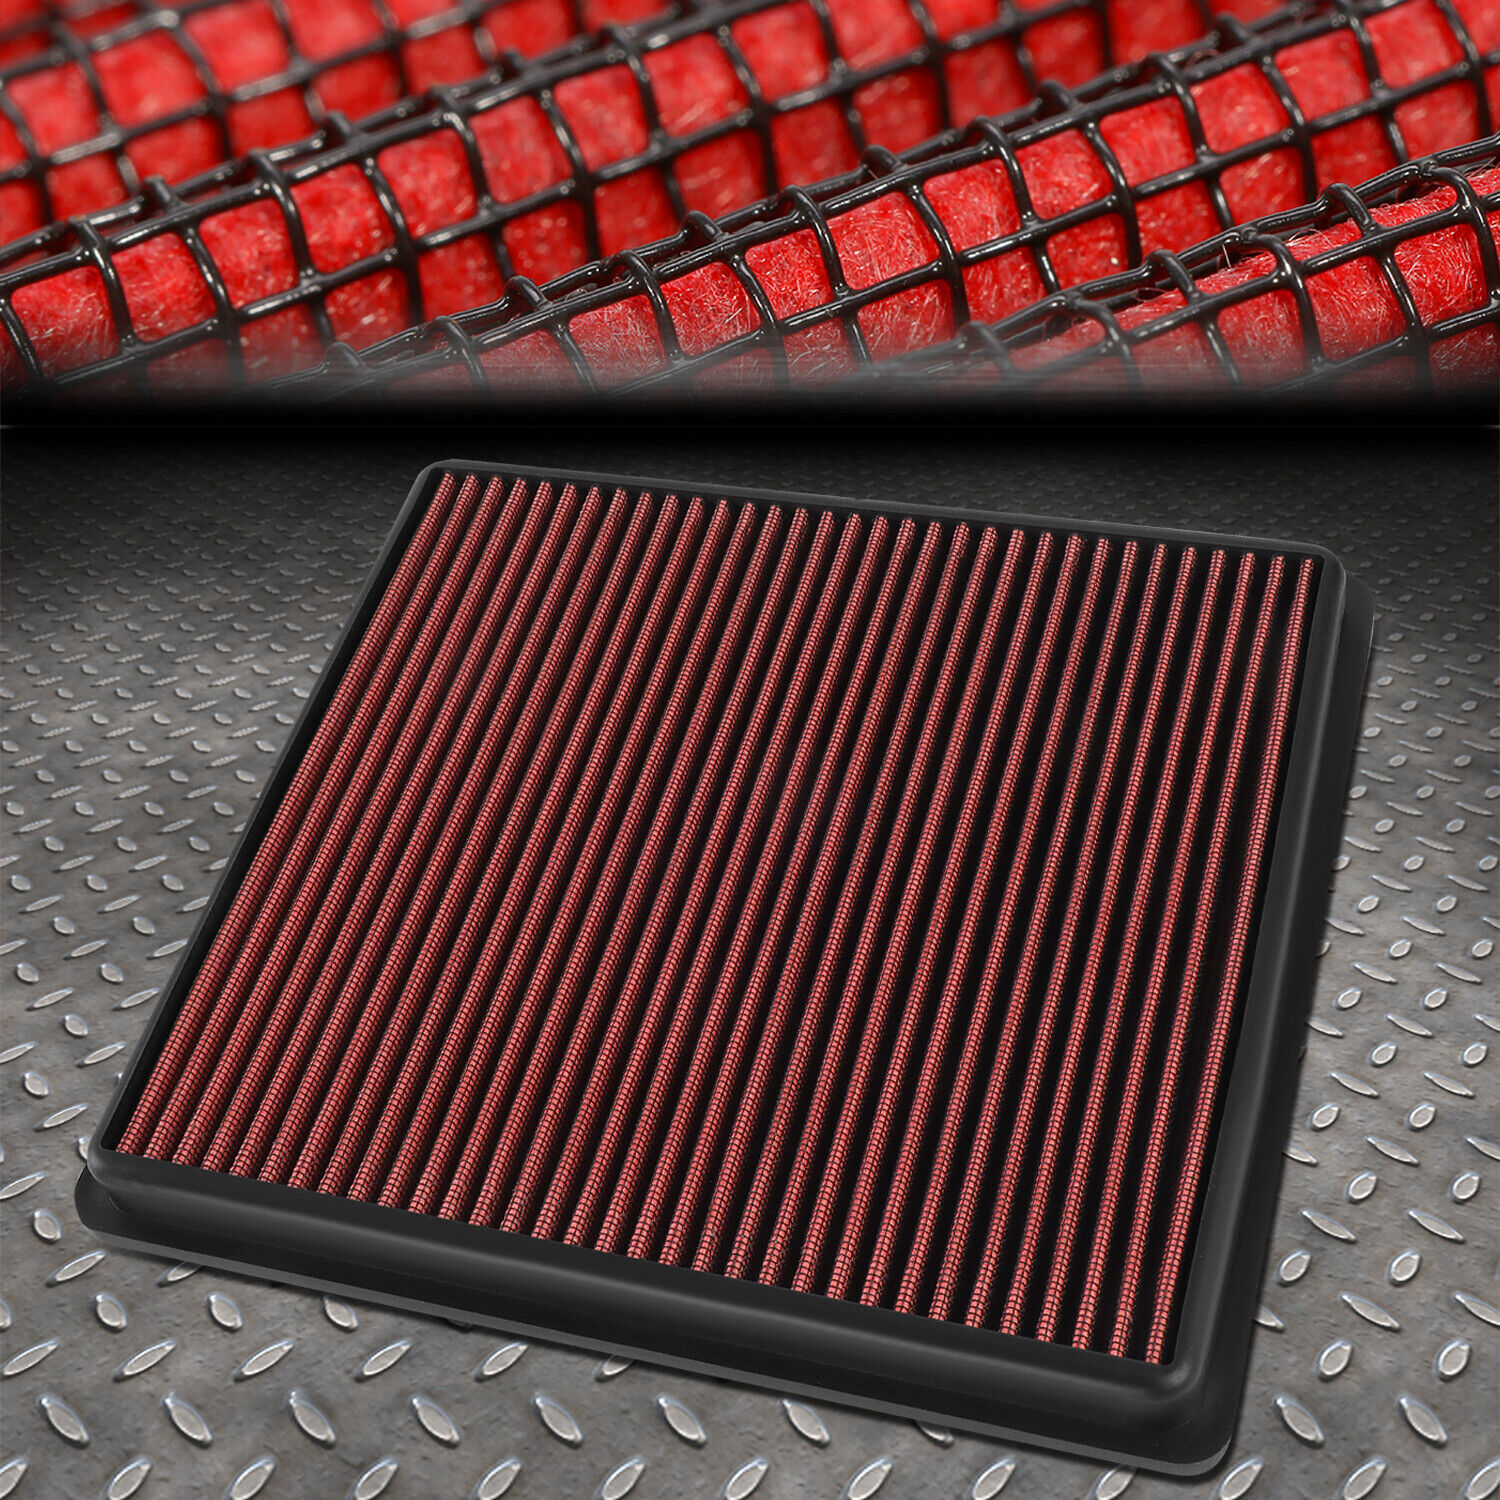 FOR F150/SUPER DUTY/EXPEDITION RED REUSABLE/DURABLE AIR FILTER INTAKE PANEL